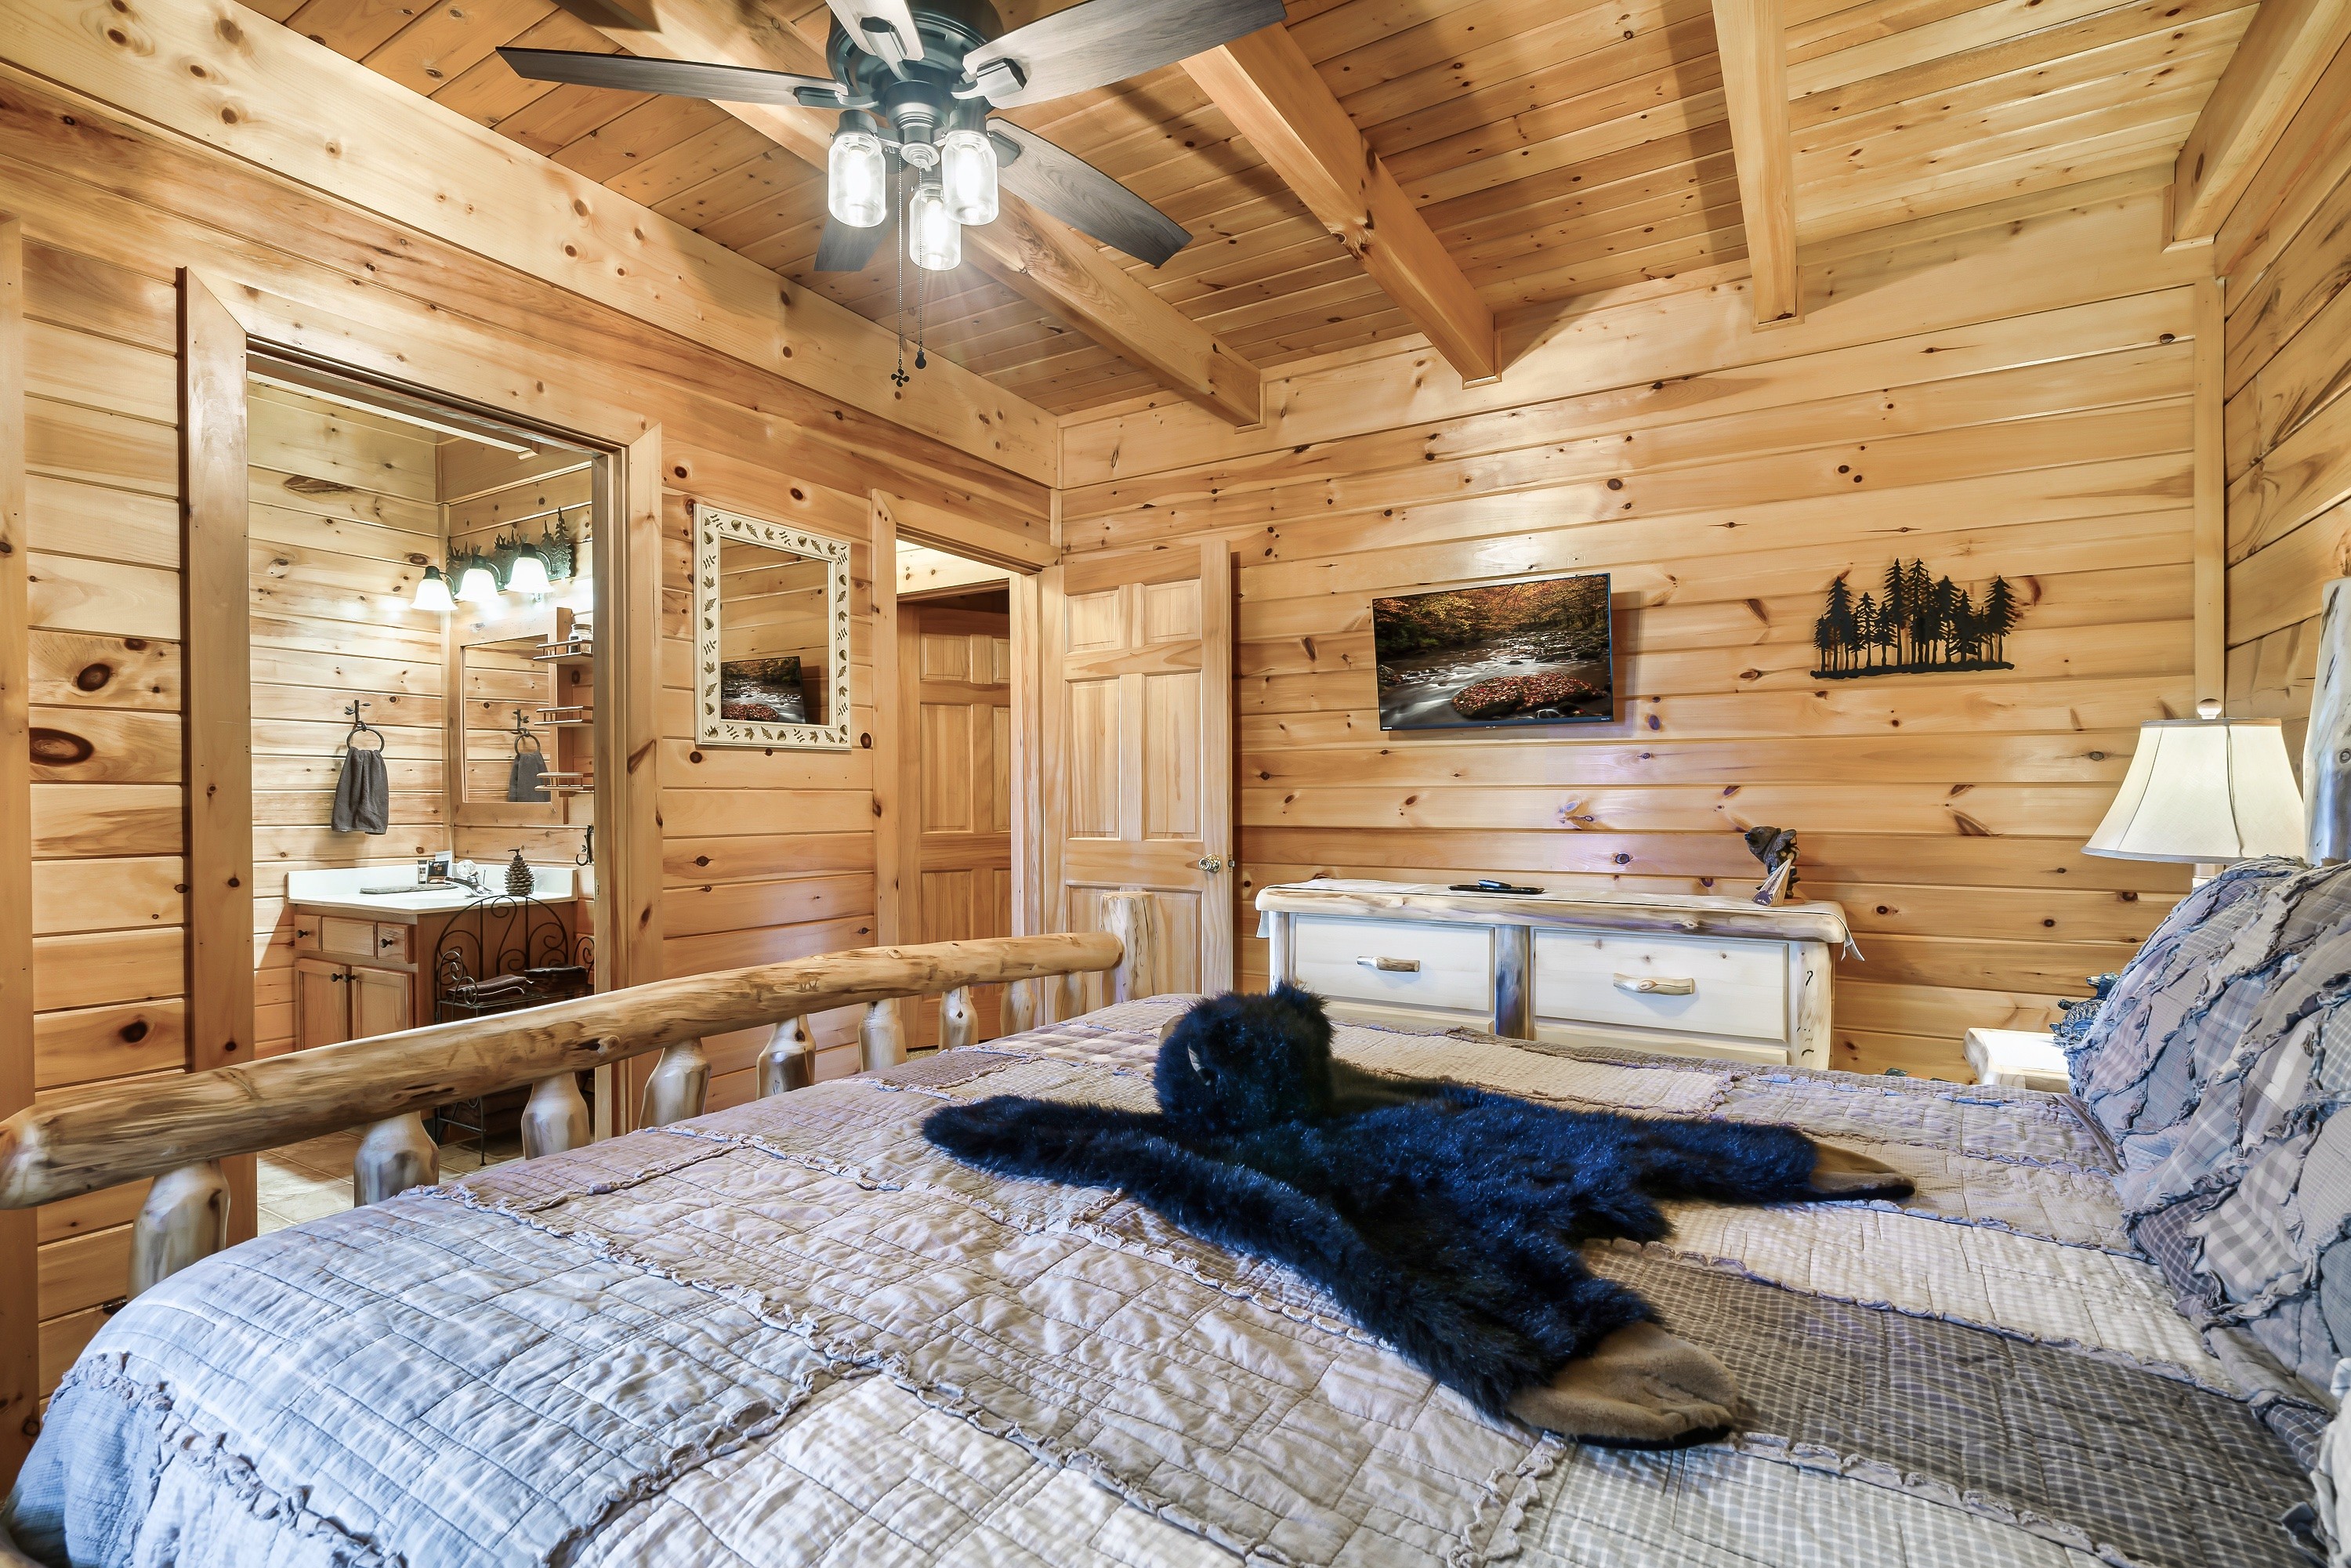 Our Gorgeous aspen log KING bedroom with attached bath